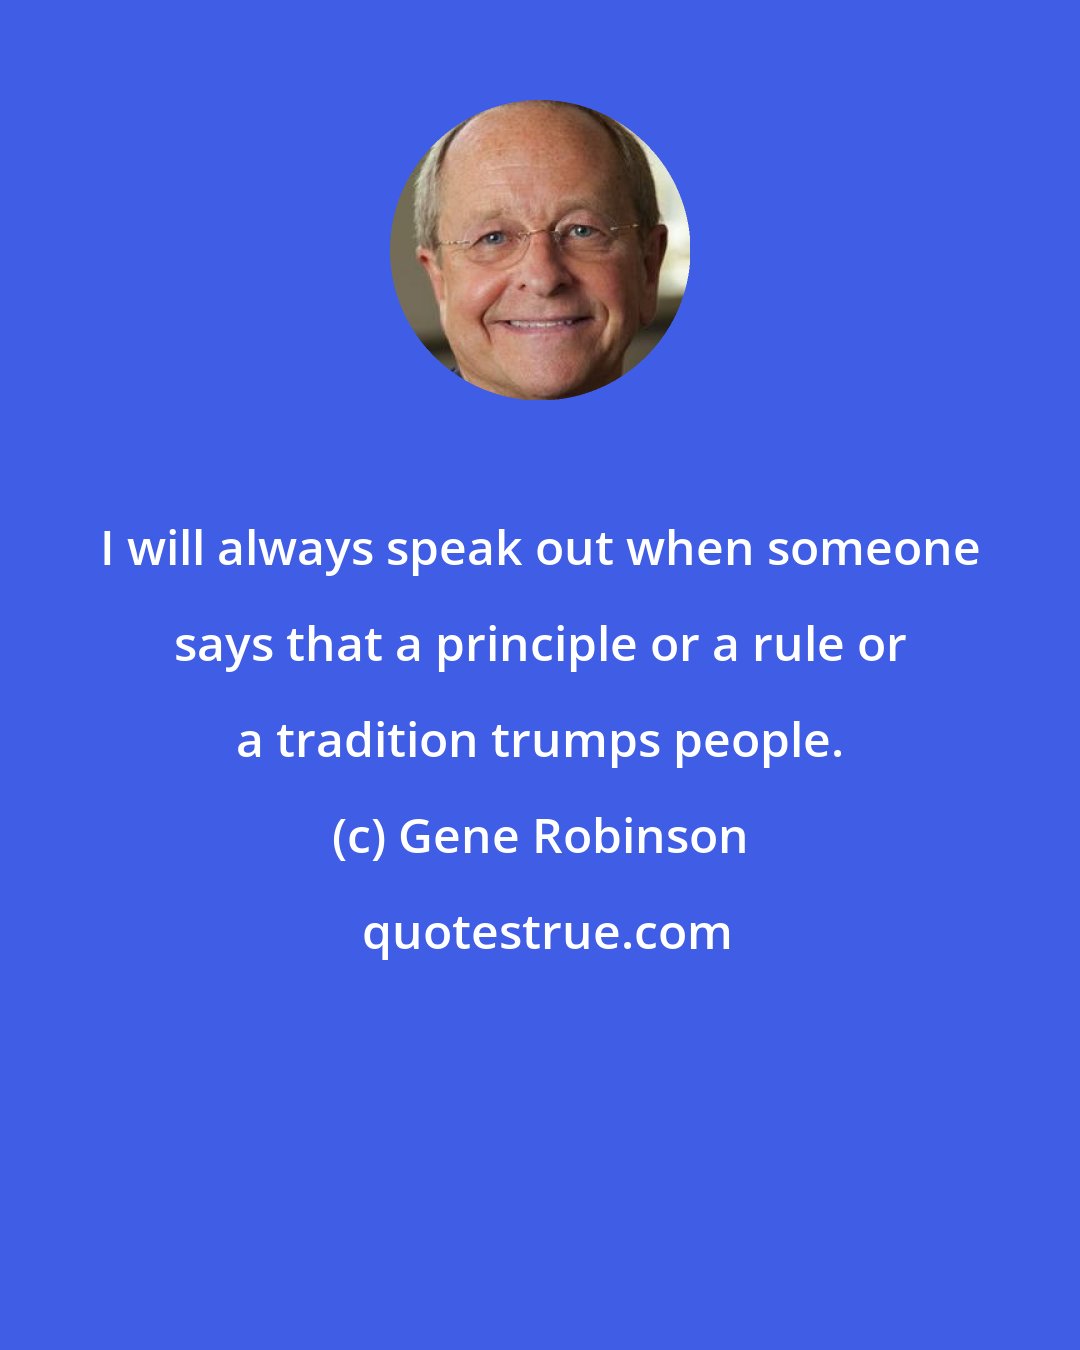 Gene Robinson: I will always speak out when someone says that a principle or a rule or a tradition trumps people.